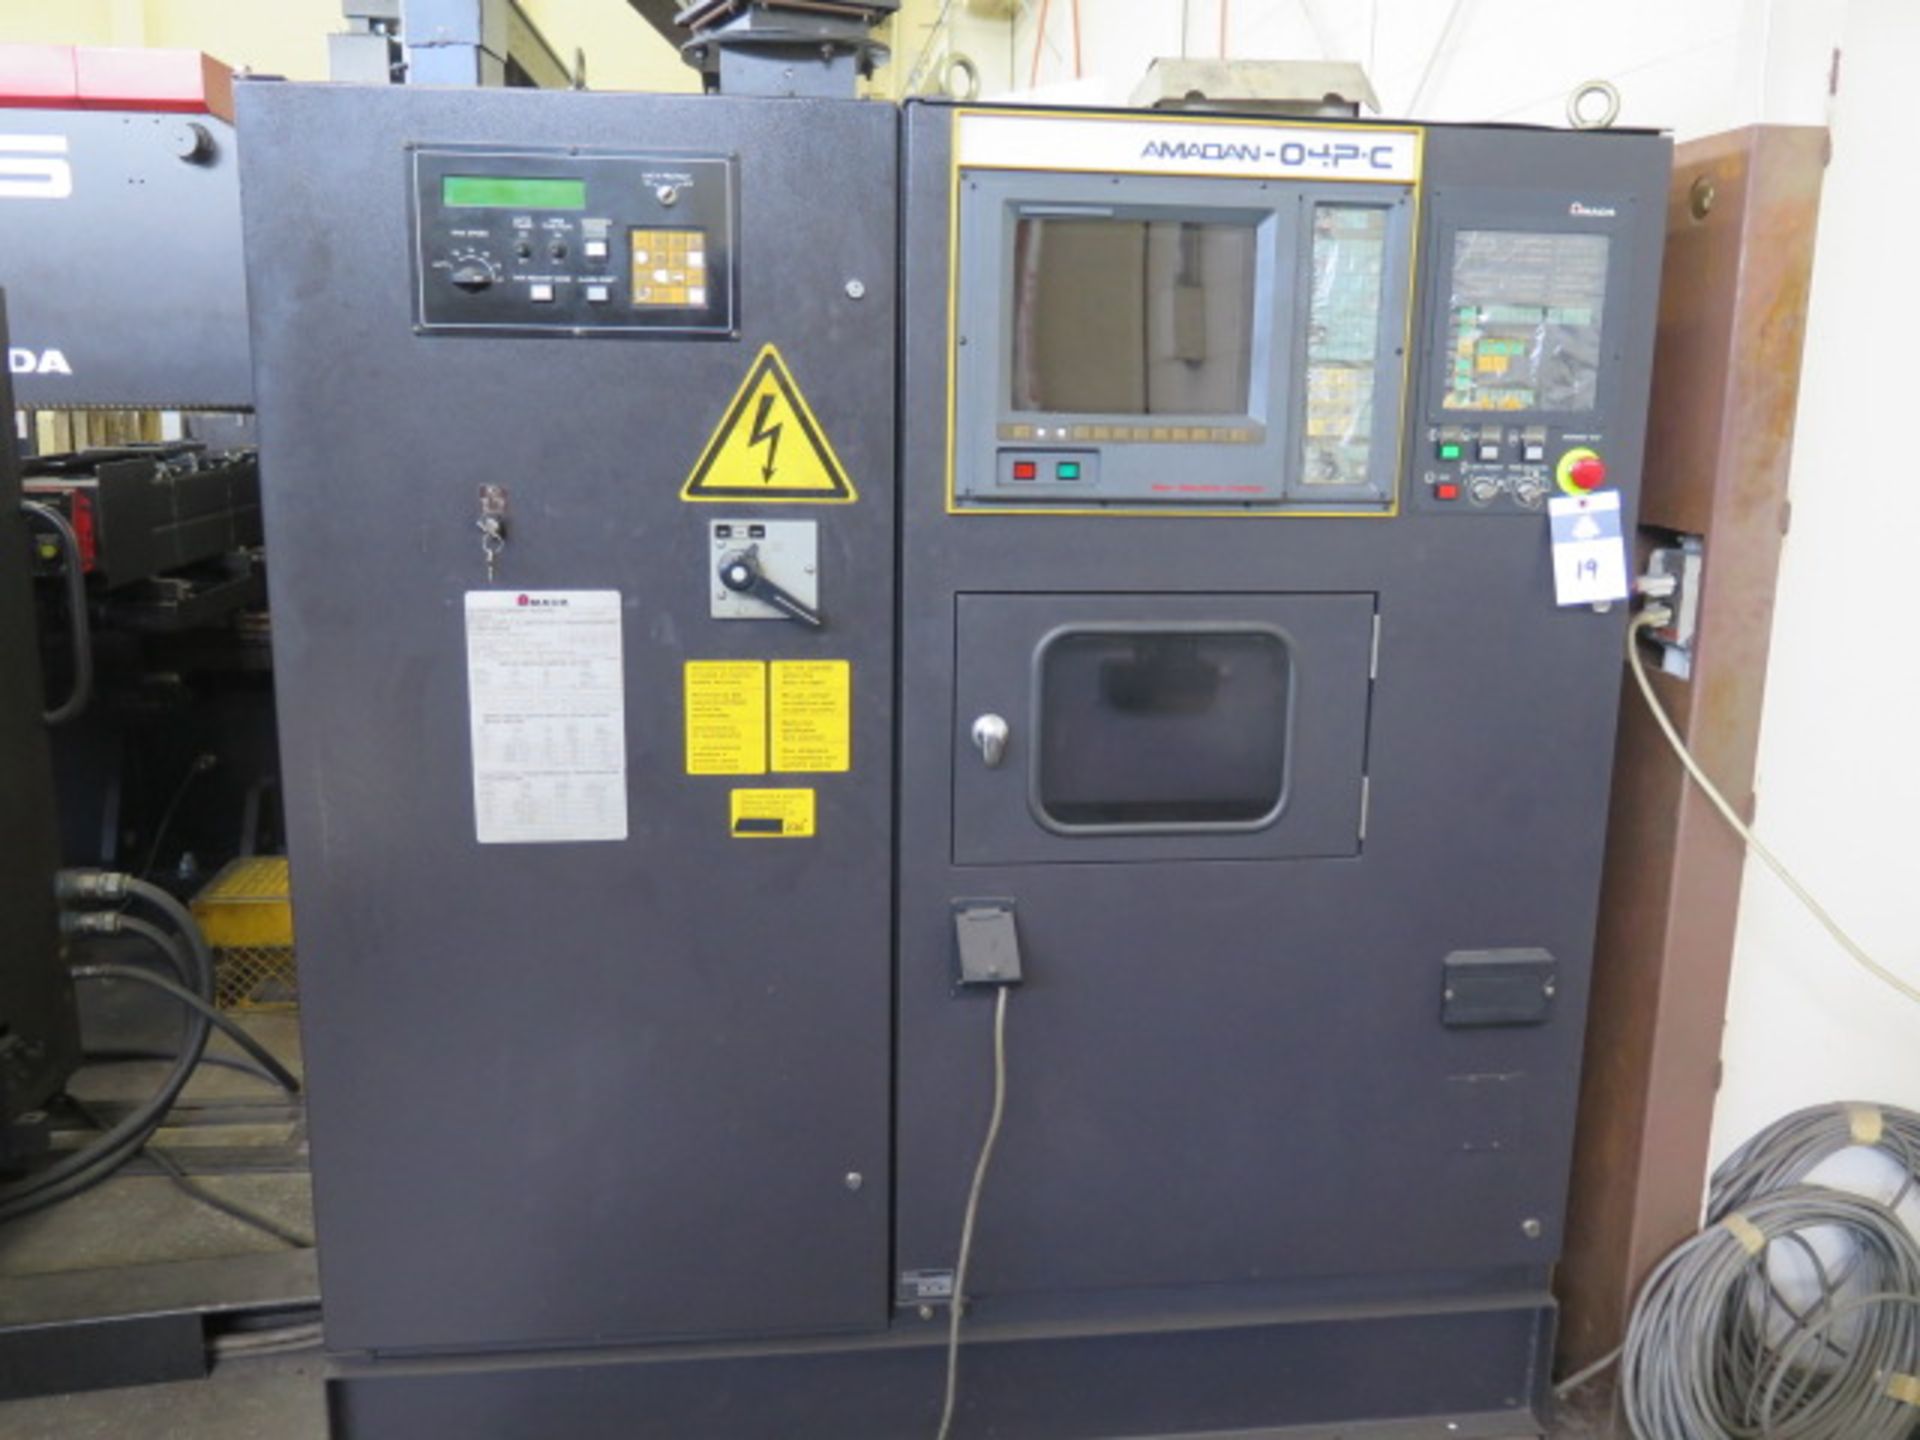 Amada VIPROS 345 30-Ton CNC Turret Punch Cell s/n 34510153 w/ 04P-C Controls, 58-Station, SOLD AS IS - Image 13 of 28